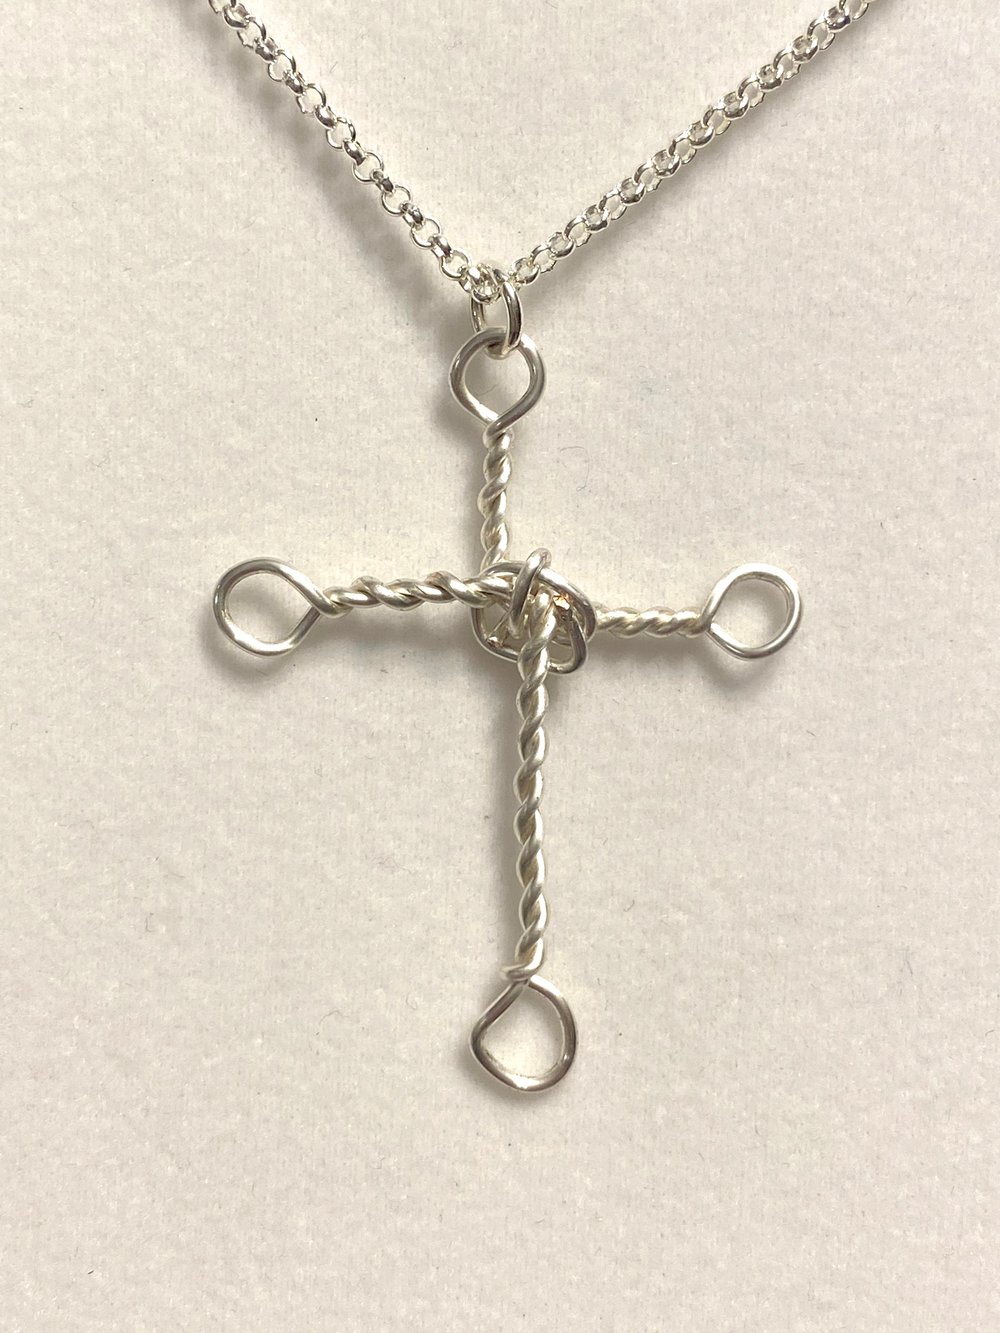 Silver Cross and Chain Necklace